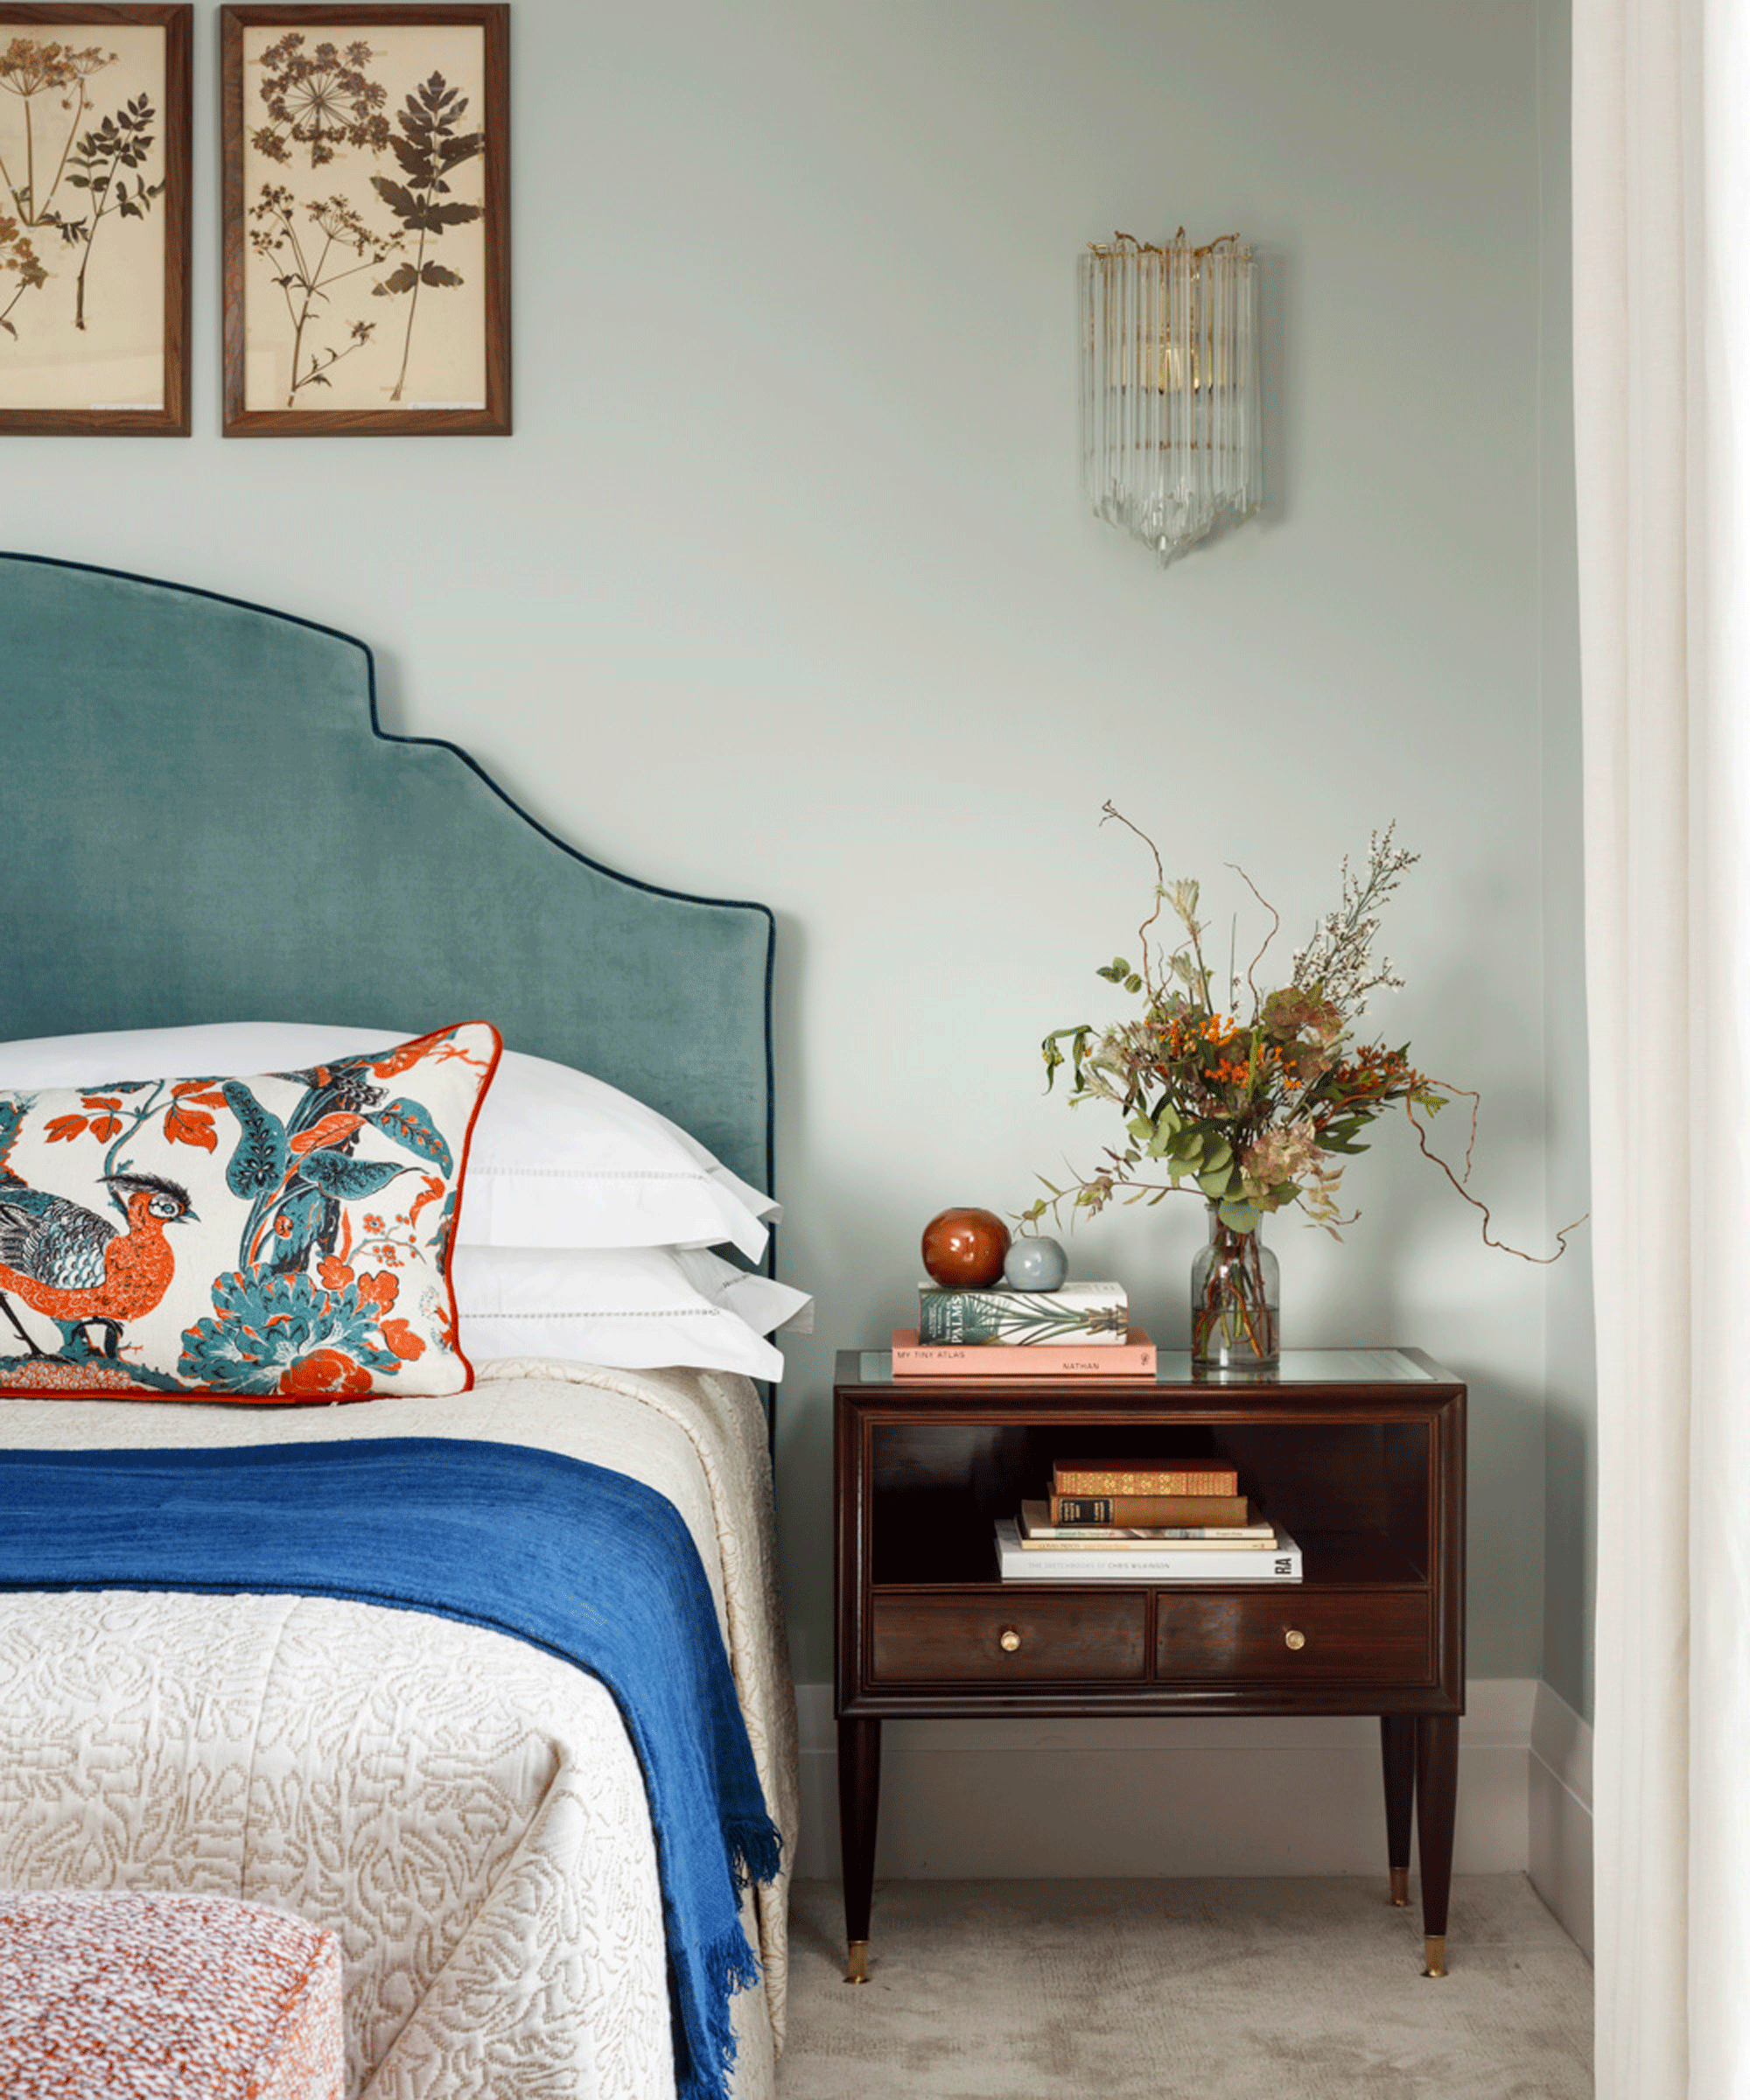 Bedroom with teal headboard and orange pattern cushion